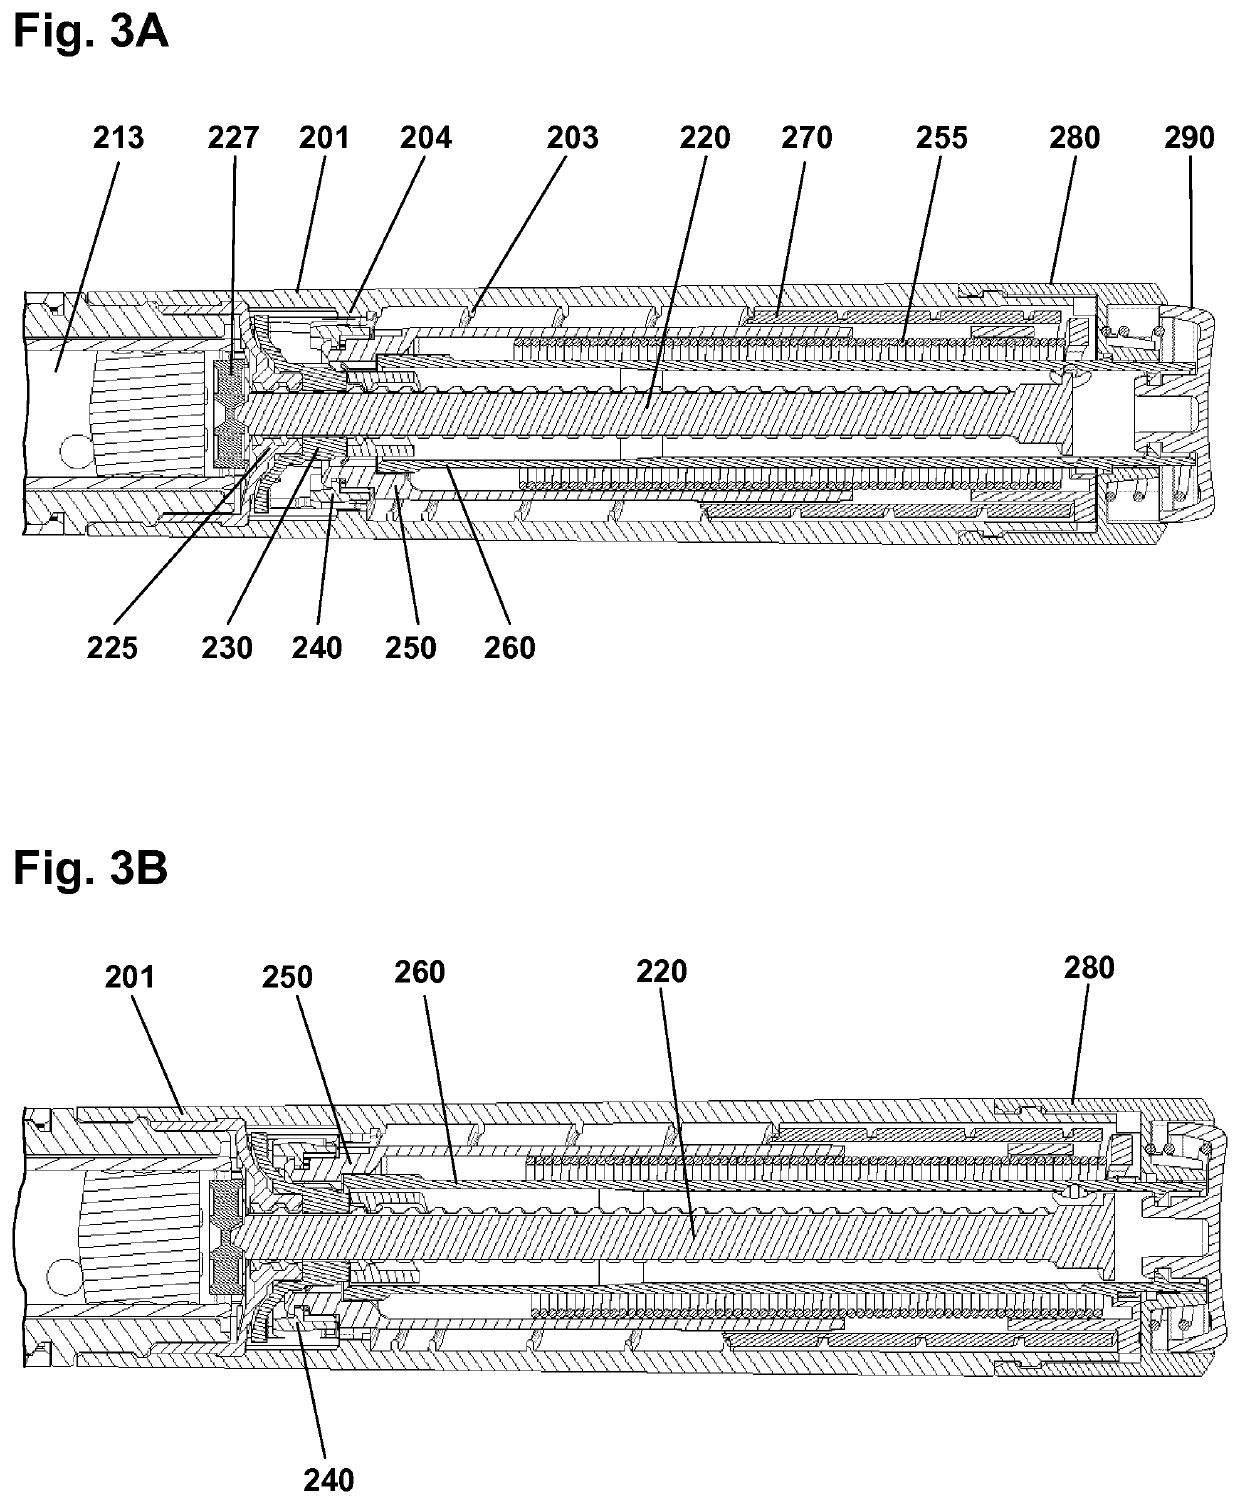 Drug delivery device with sound transducer